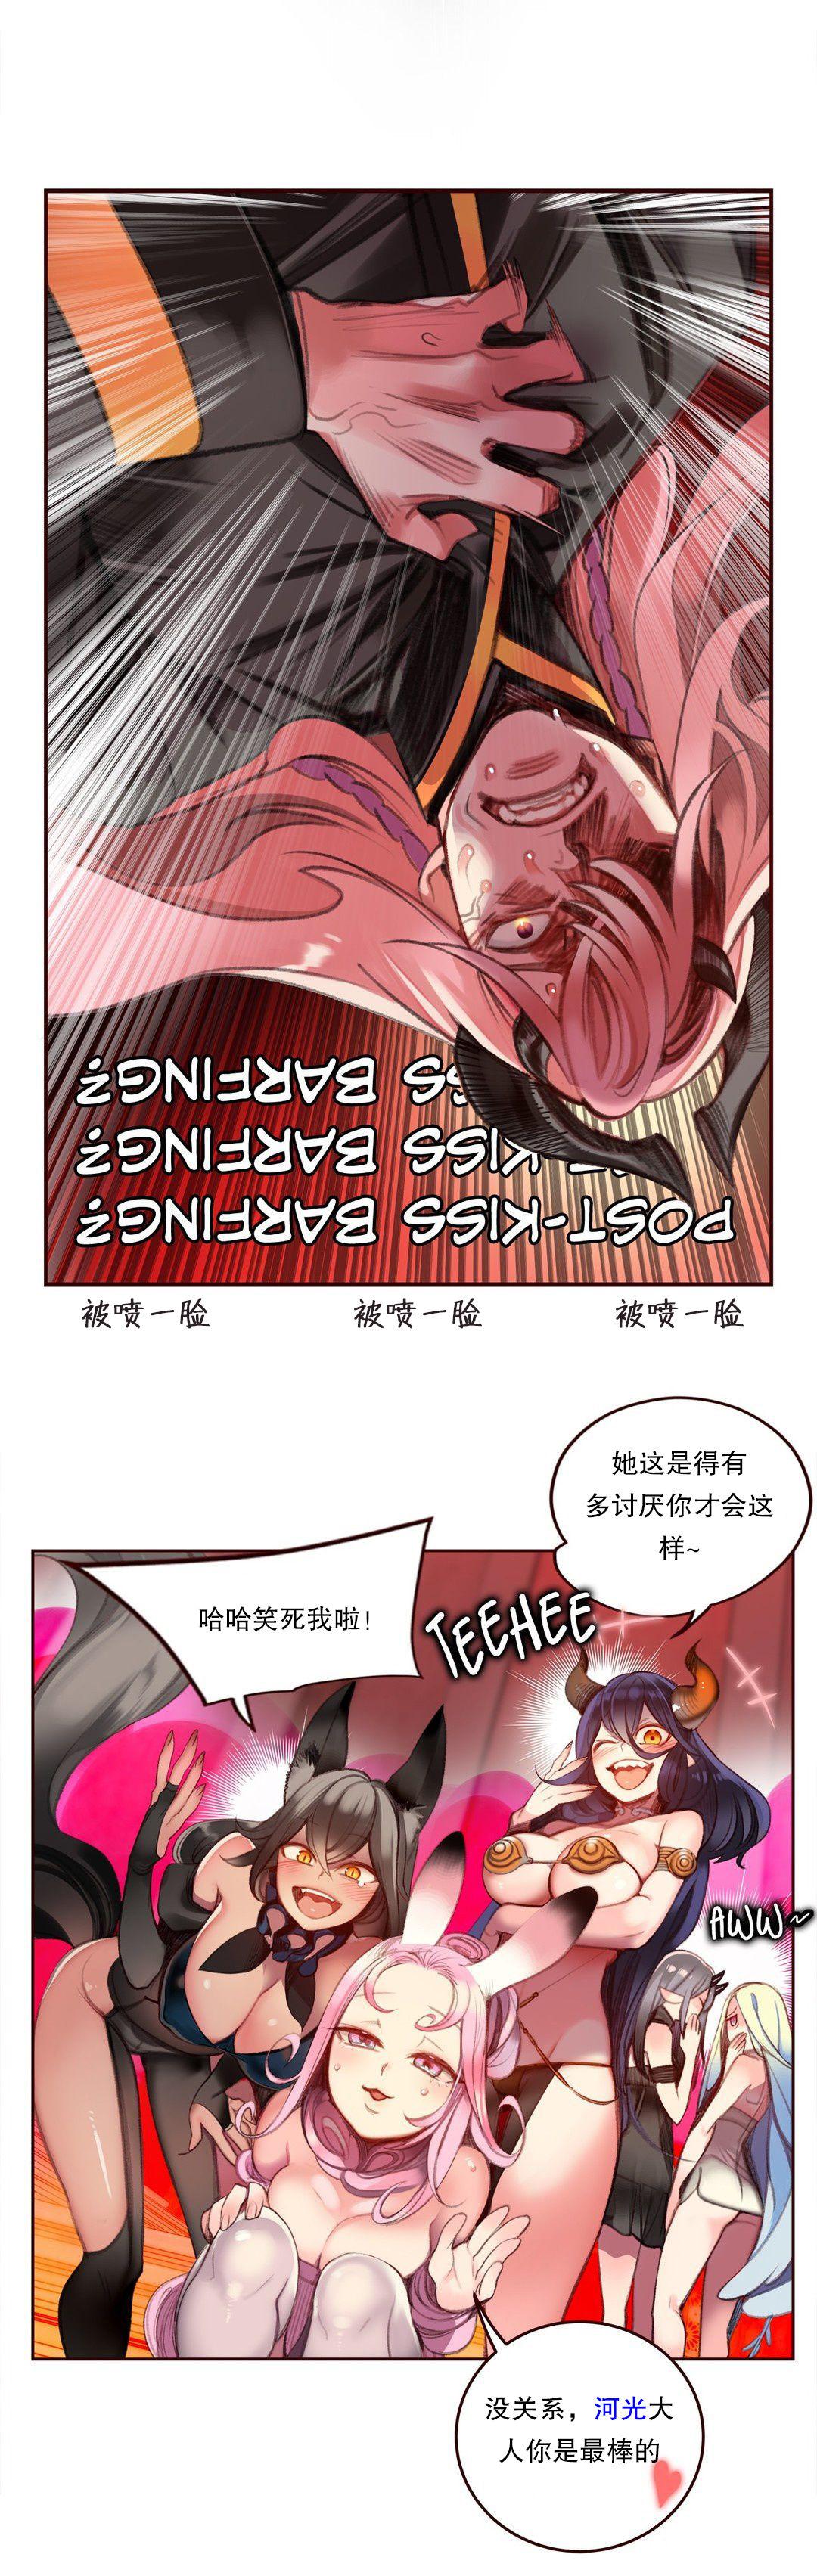 [Juder] Lilith`s Cord (第二季) Ch.61-64 [Chinese] [aaatwist个人汉化] [Ongoing] 72